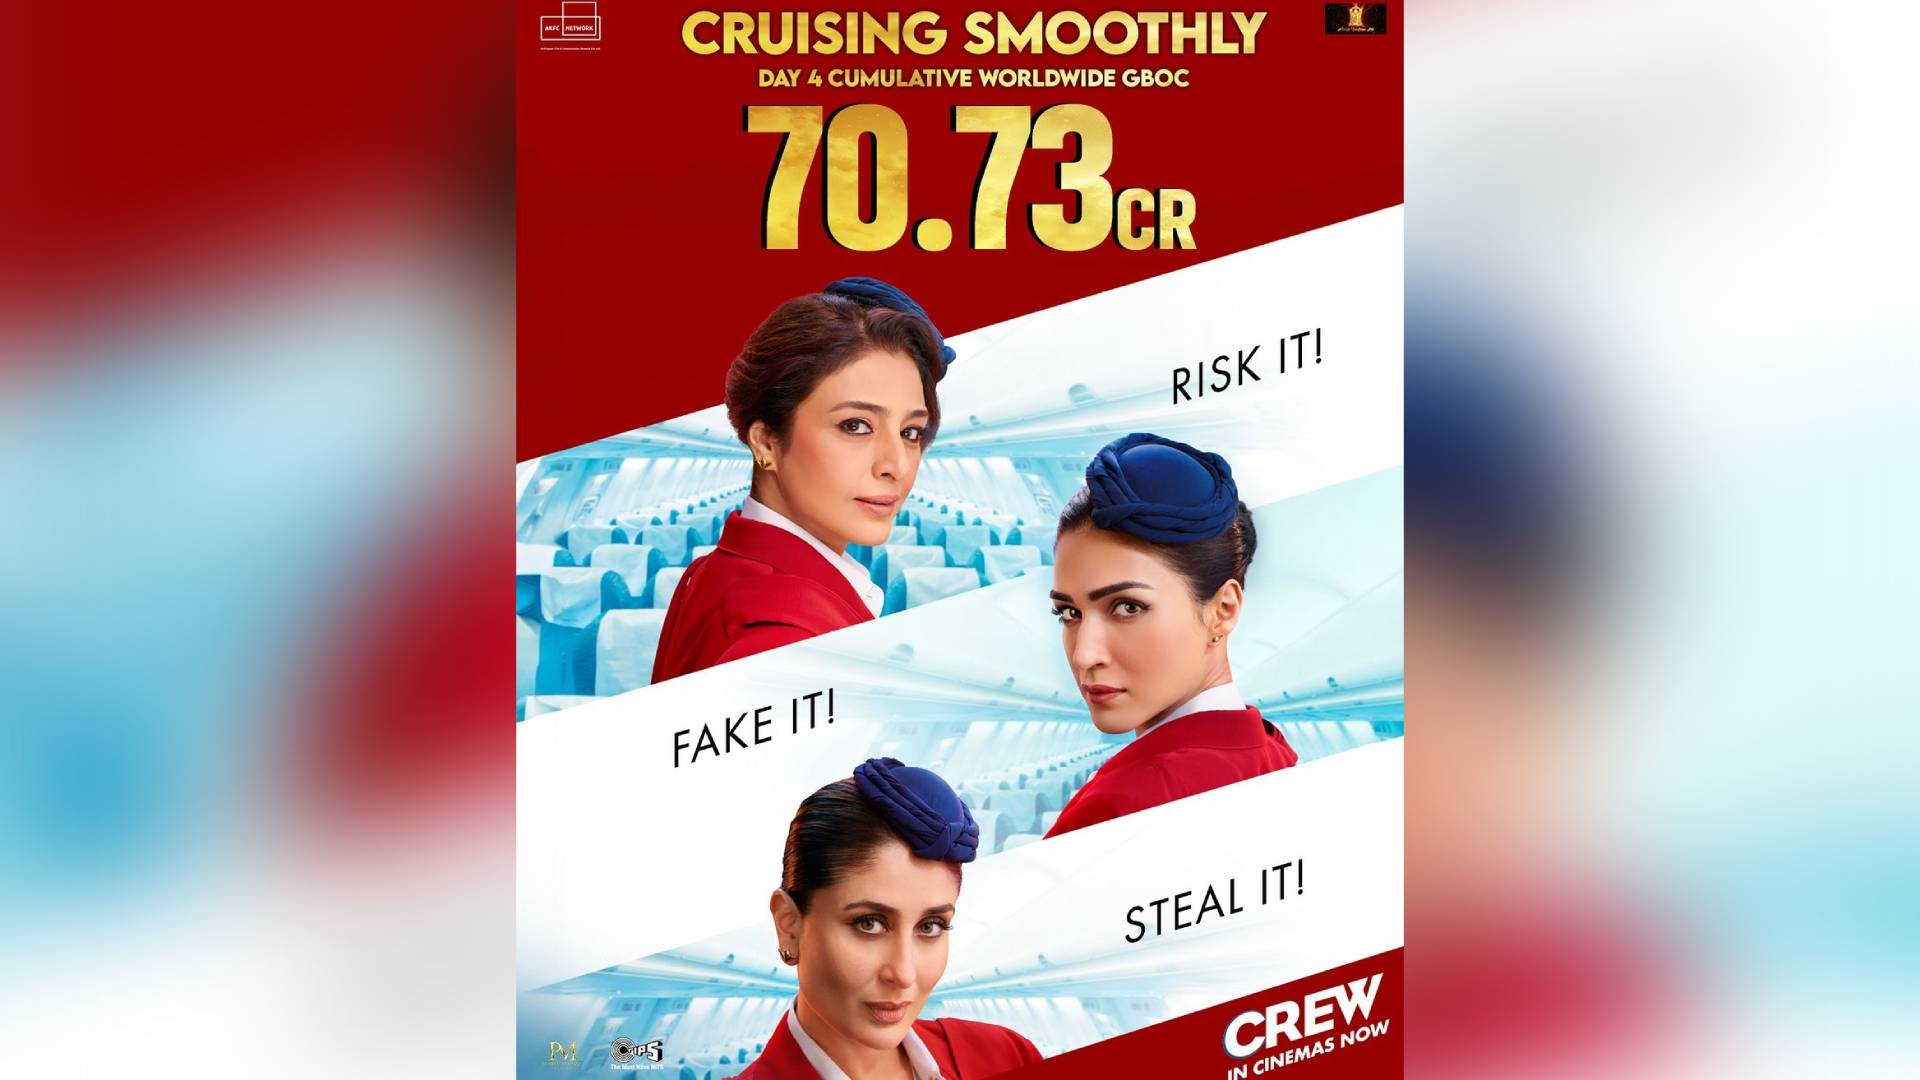 Crew witnesses a solid hold at the box office on the first Monday! Collects 8.20 Cr. gross worldwide! Total reaches 70.73 Cr. worldwide gross!